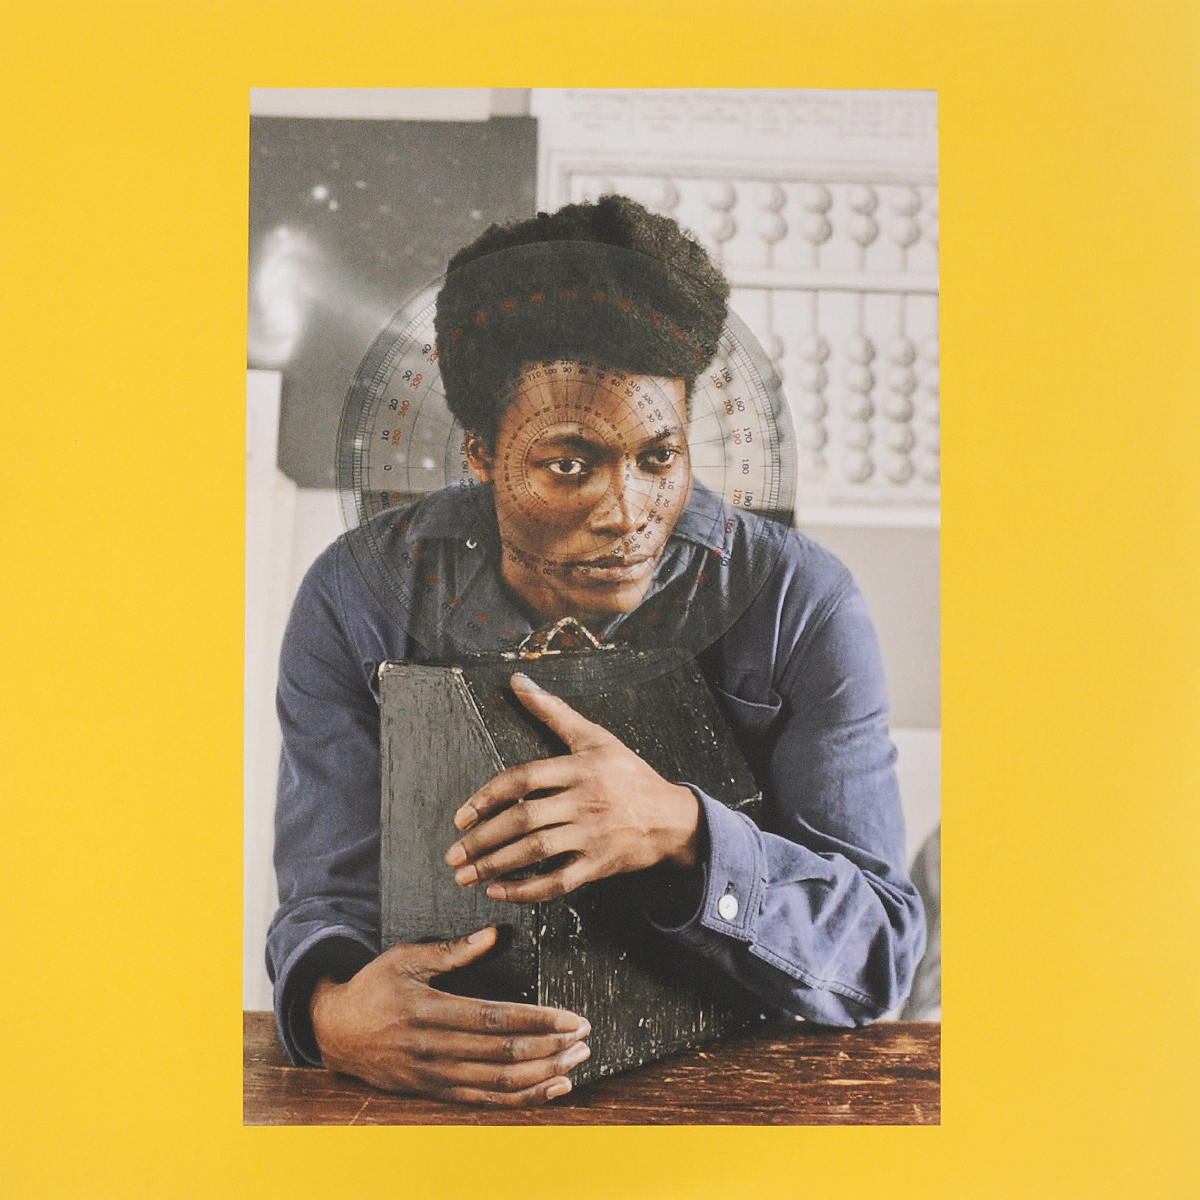 Benjamin Clementine. I Tell A Fly (2 LP)